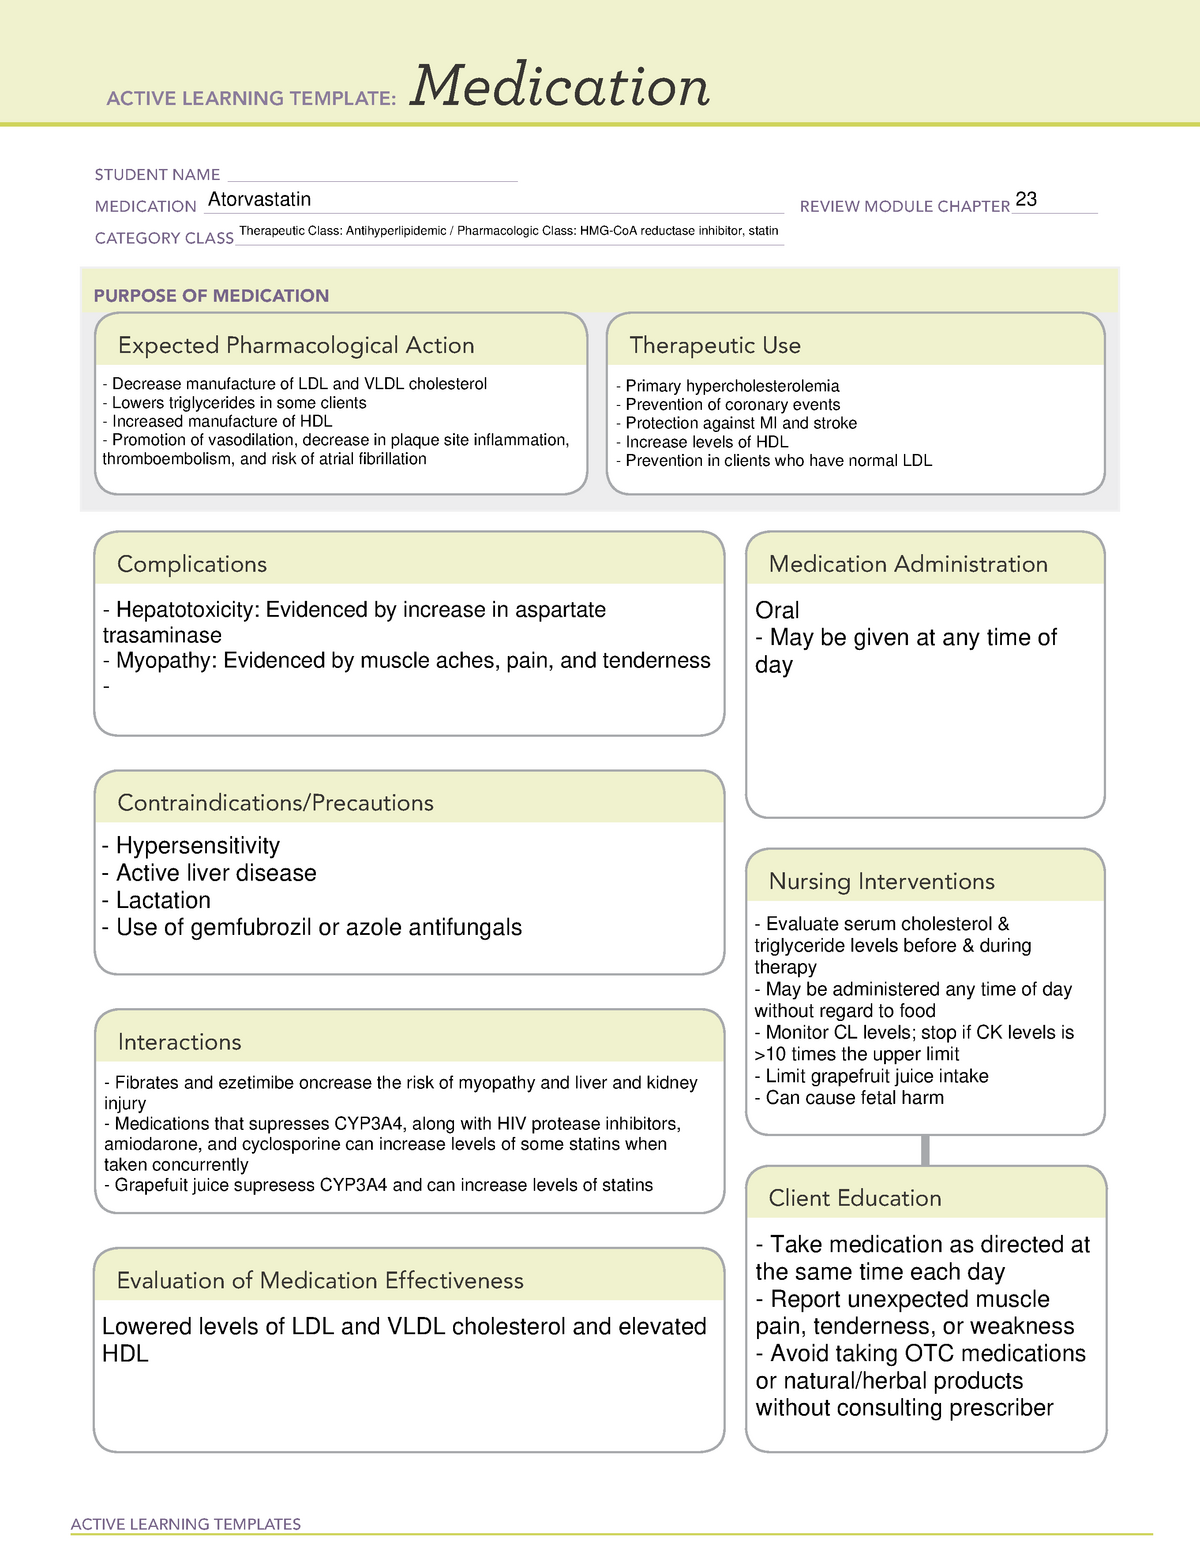 atorvastatin-med-card-active-learning-templates-medication-student